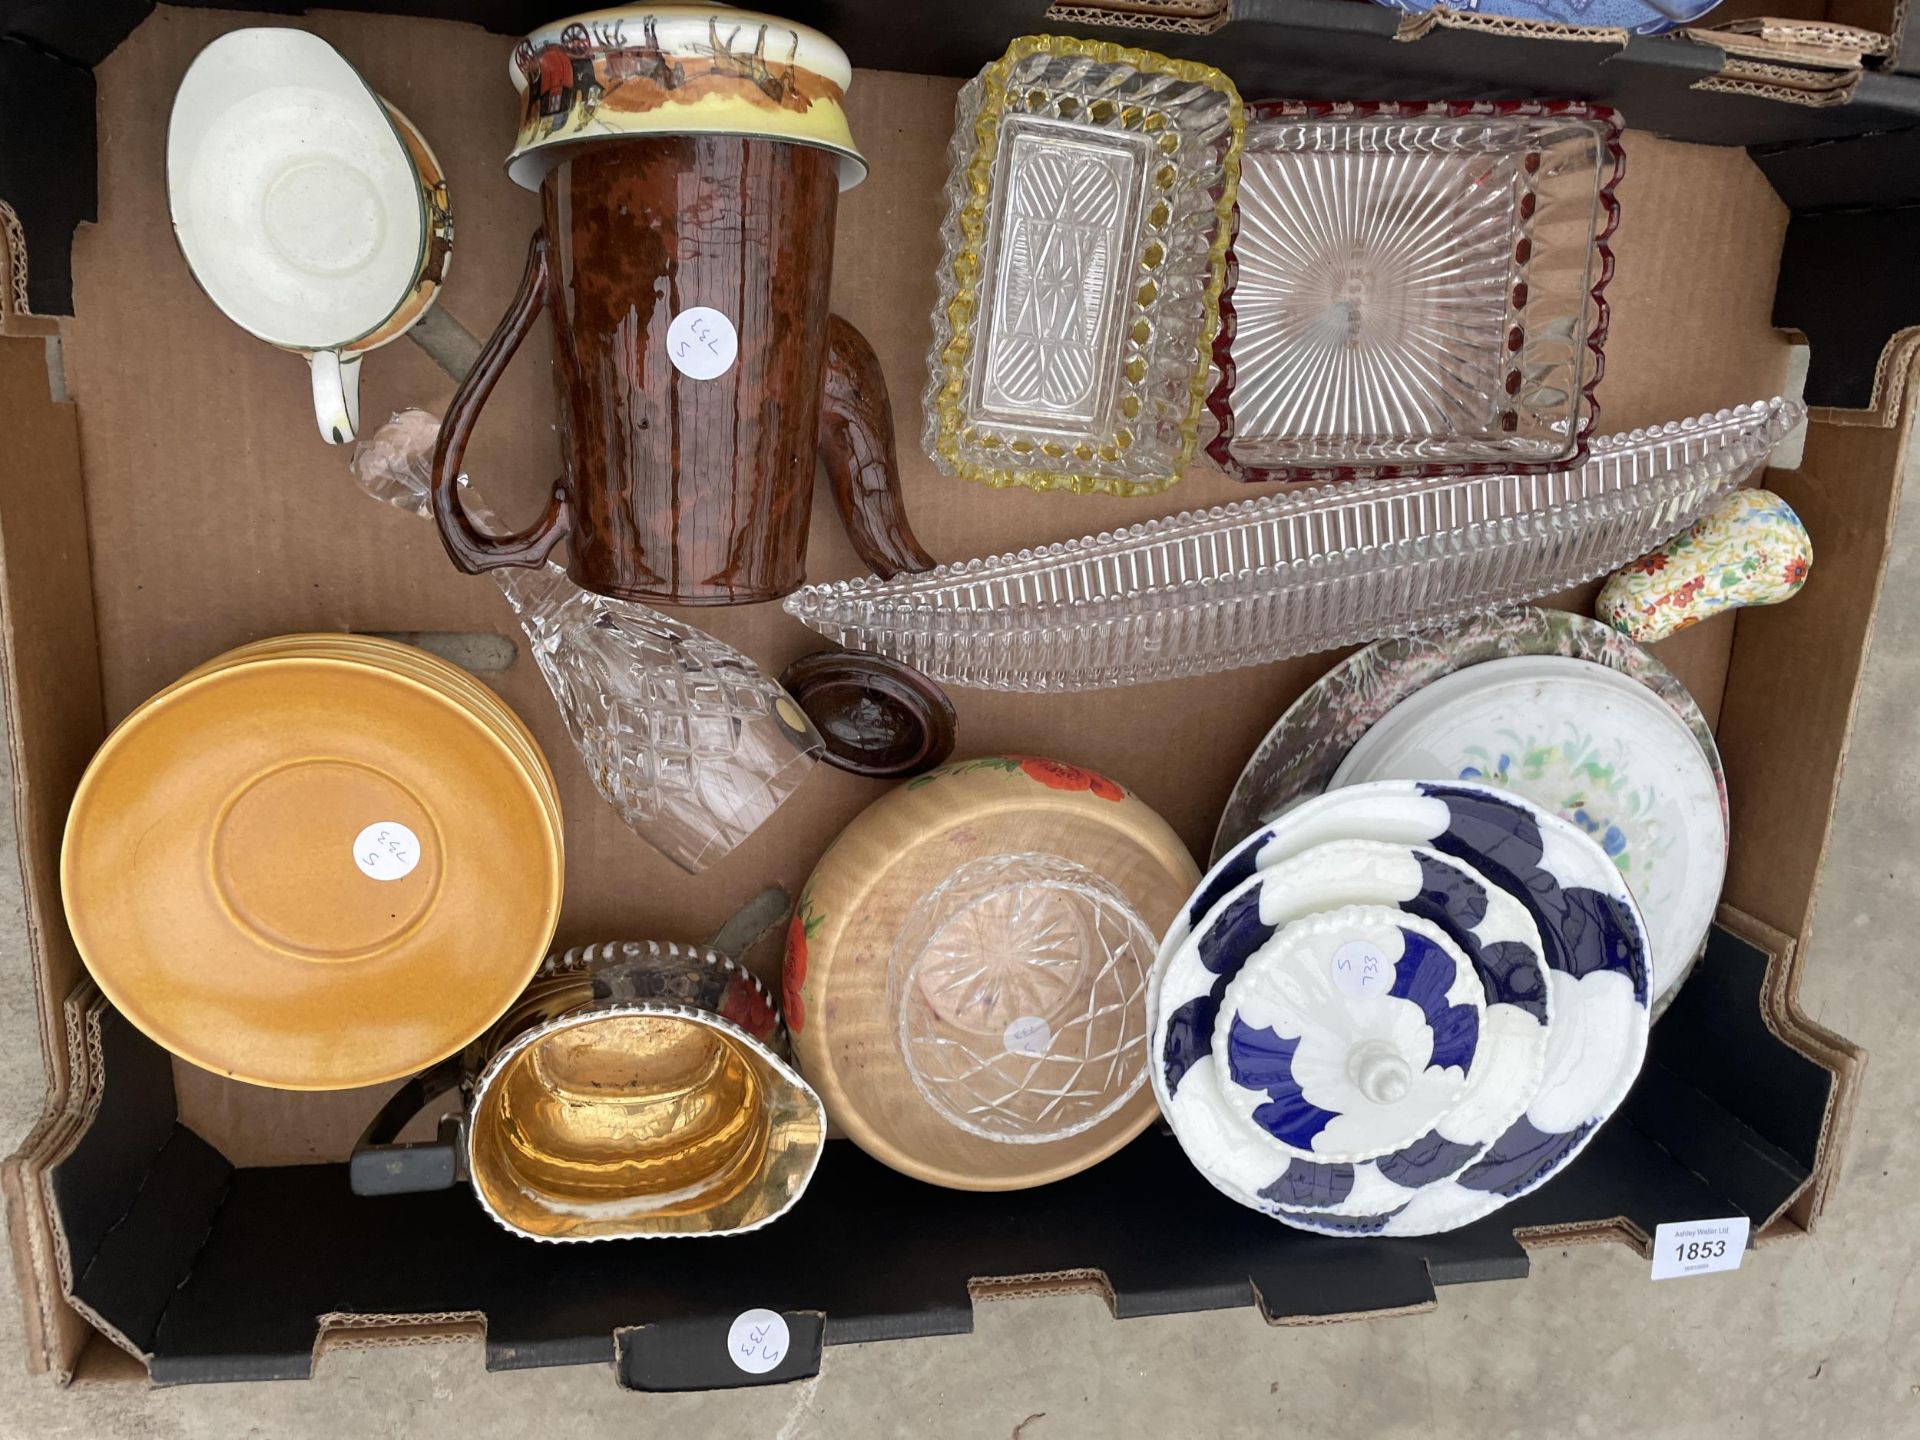 THREE BOXES OF VARIOUS CERAMIC ITEMS TO INCLUDE PLATES, CUPS, ETC - Image 3 of 3